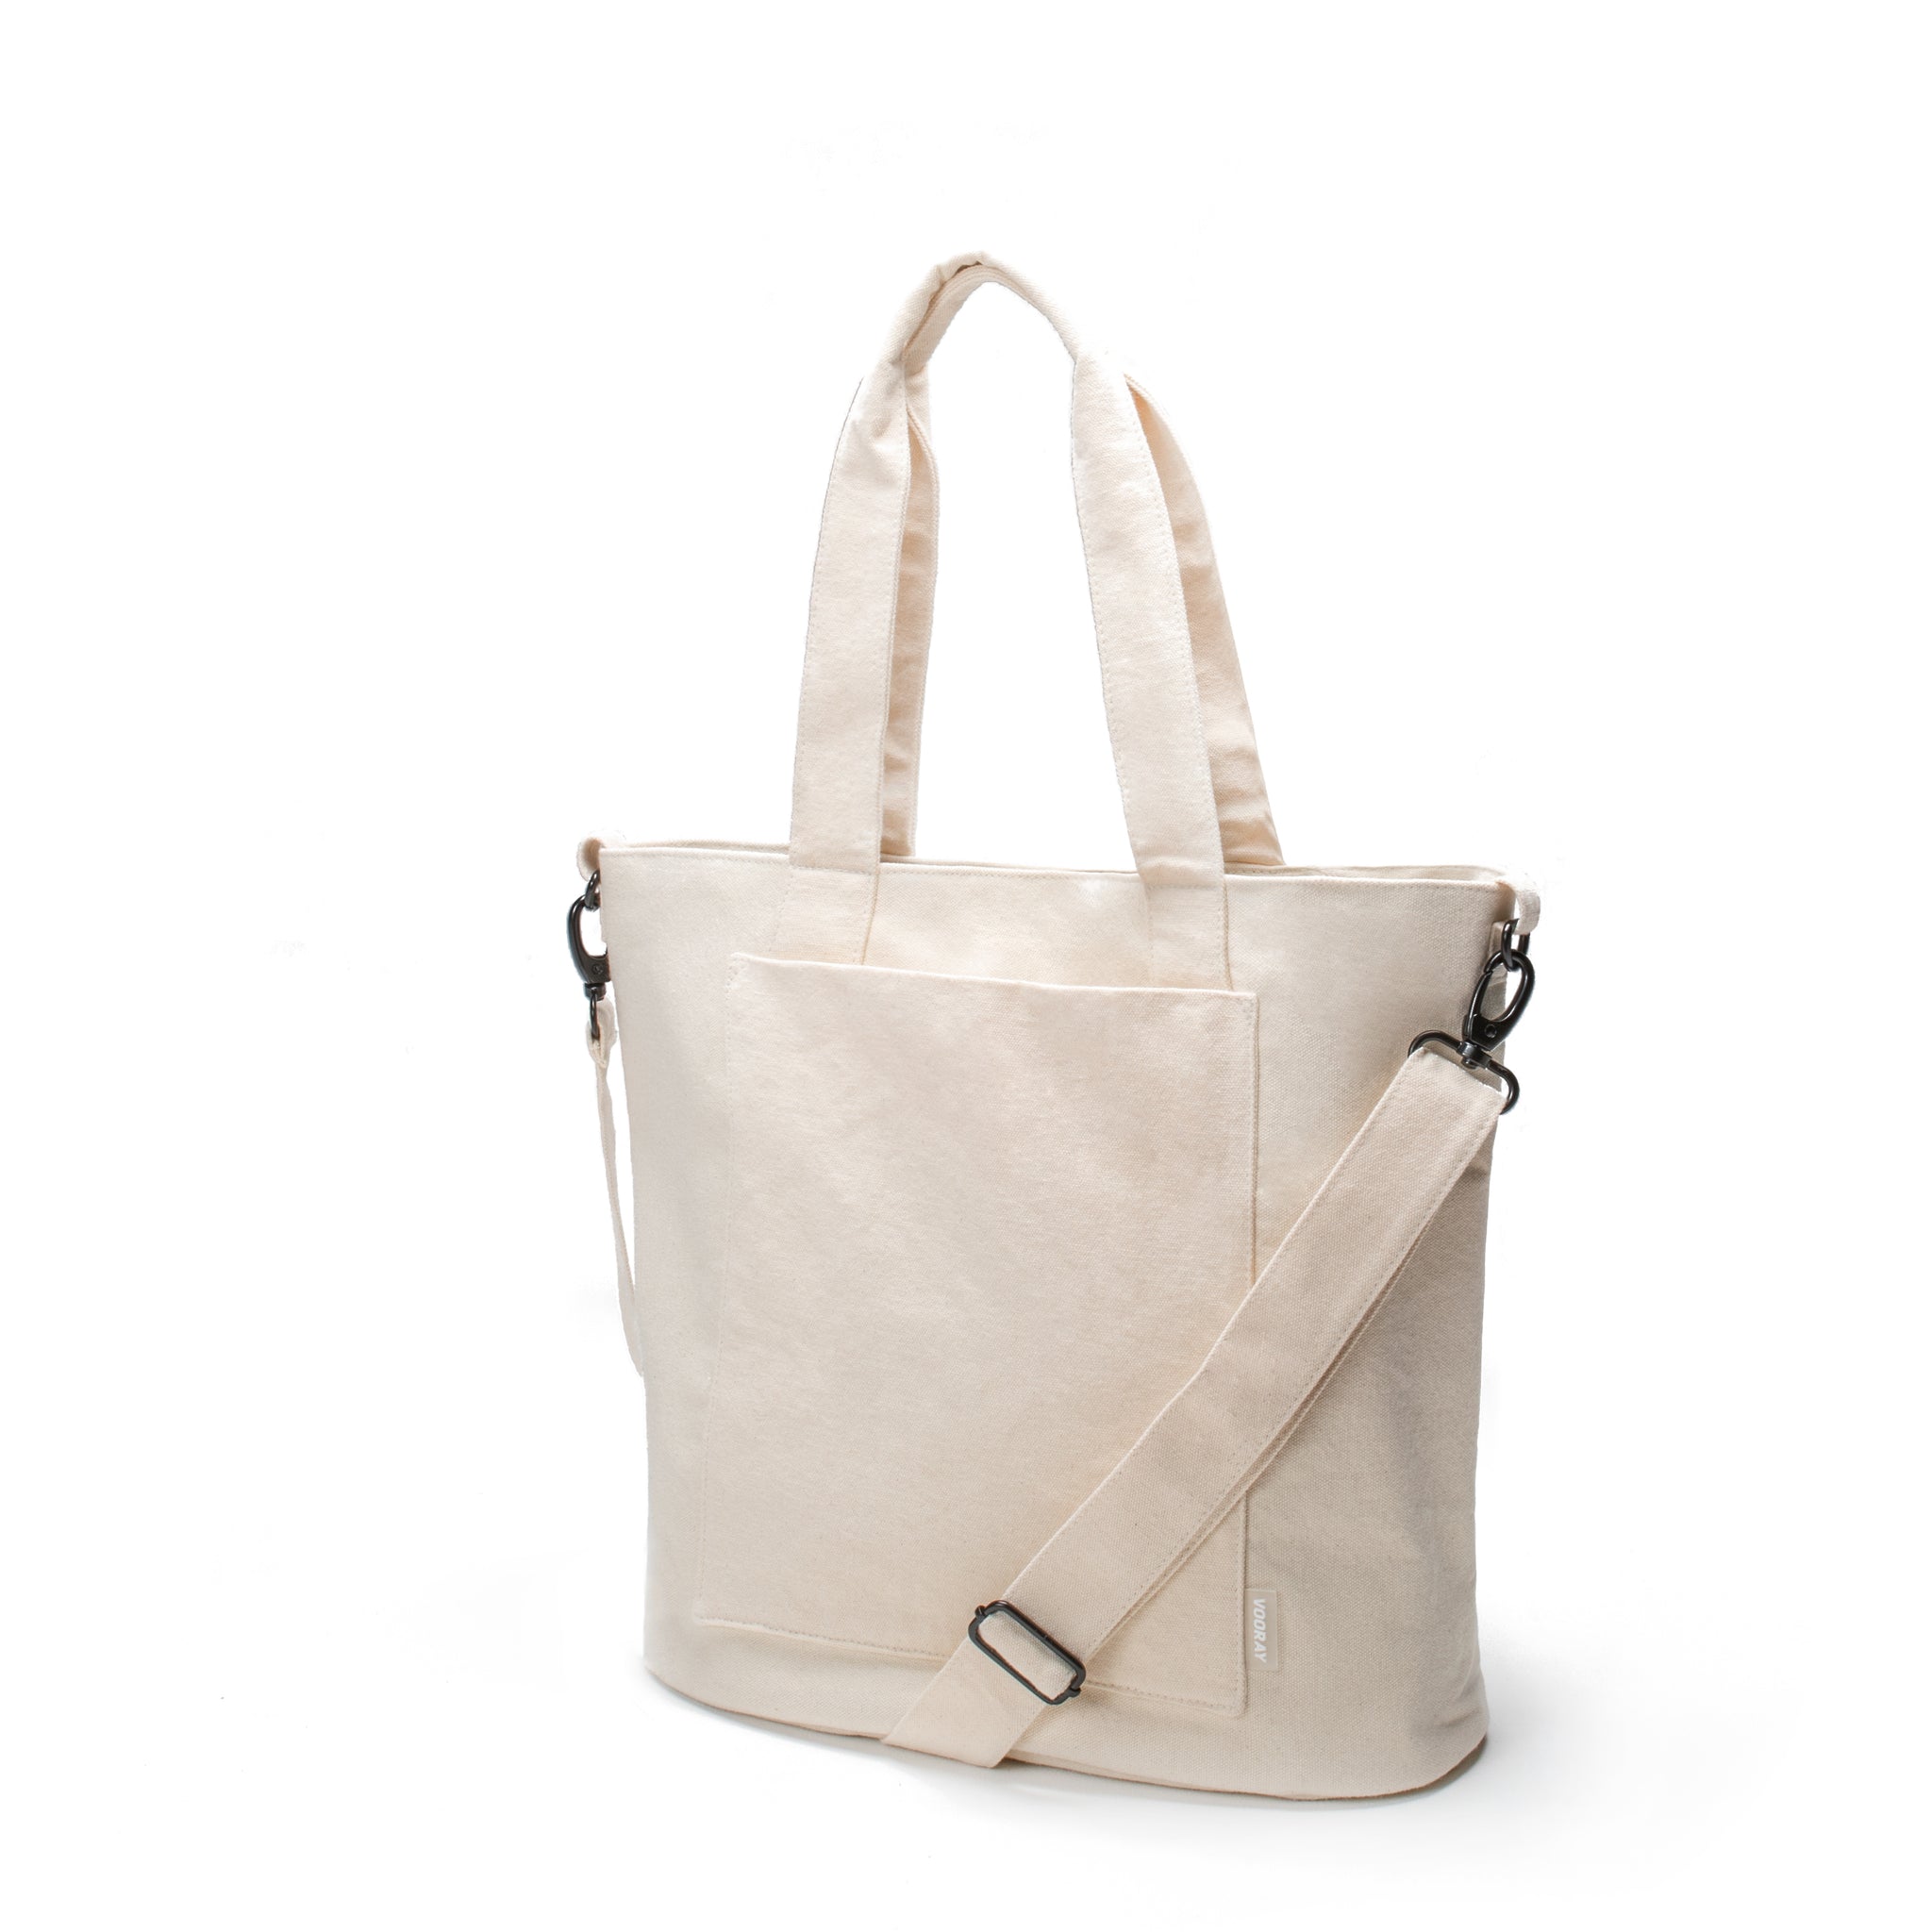 Vooray Zoey Tote - 52 cm - 22L - Organic Cotton Sportsbag or travelbag